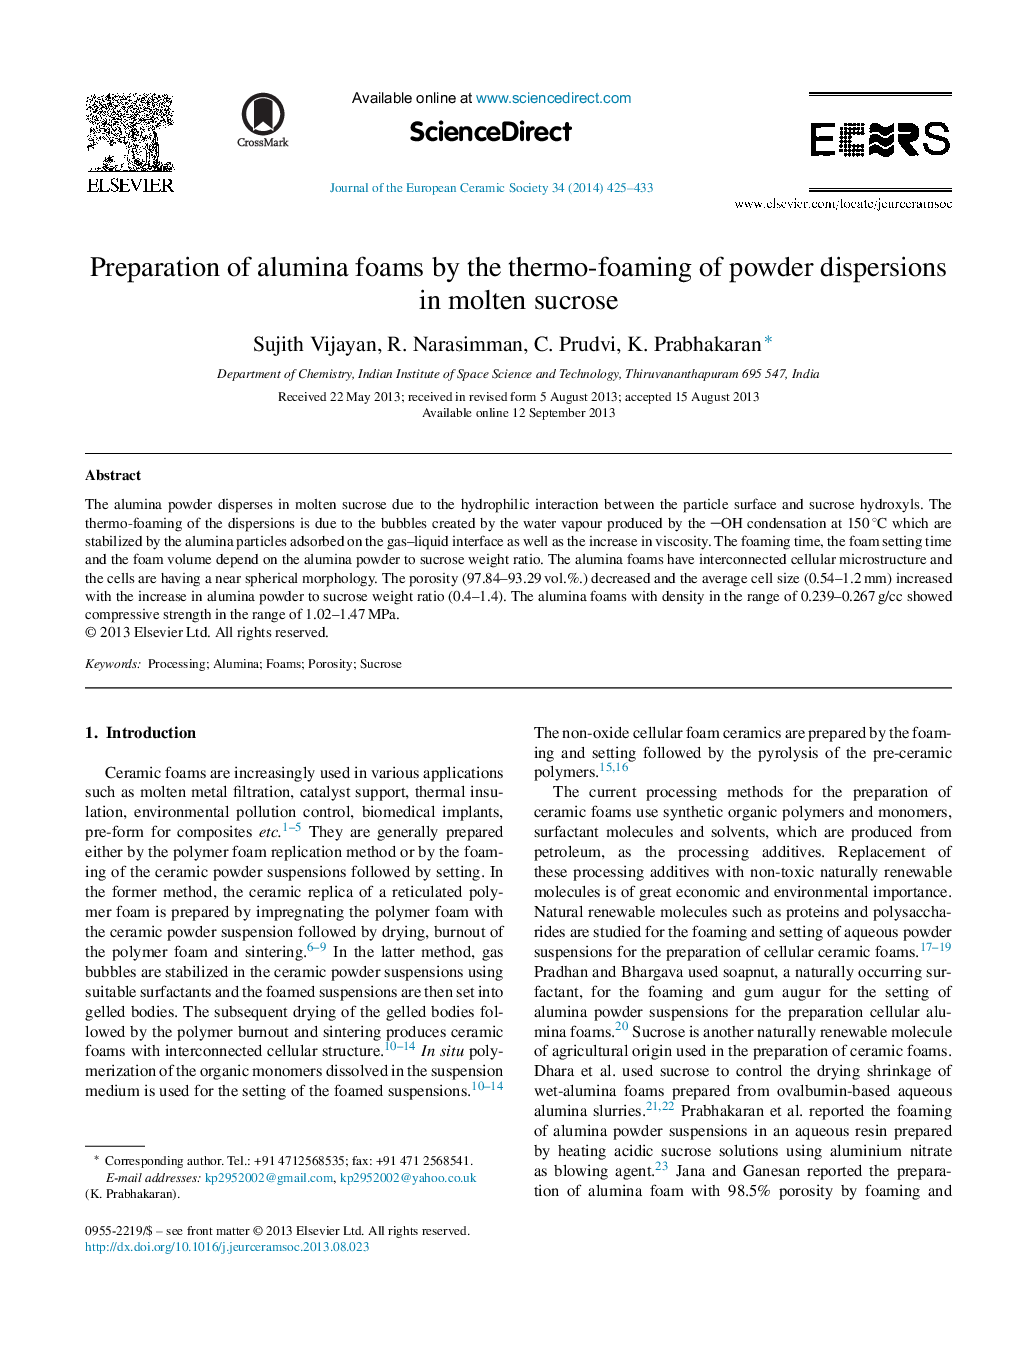 Preparation of alumina foams by the thermo-foaming of powder dispersions in molten sucrose